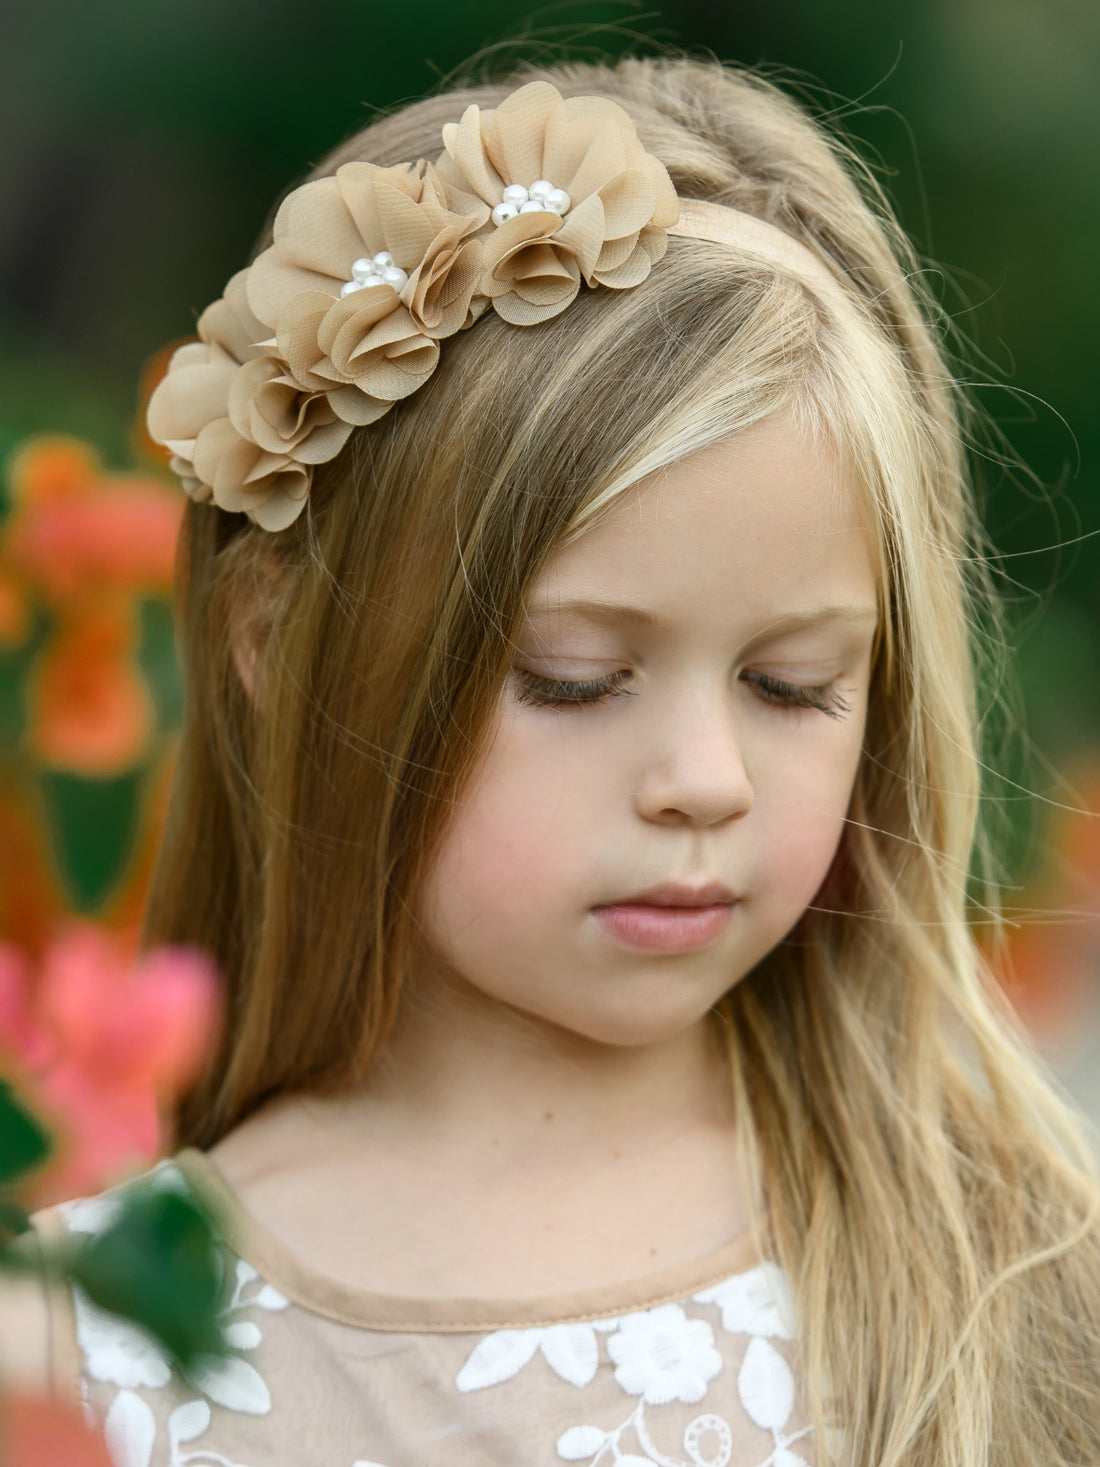 Vintage Blooms Trio Headband Toffee - 11 Colors Available – Think Pink Bows